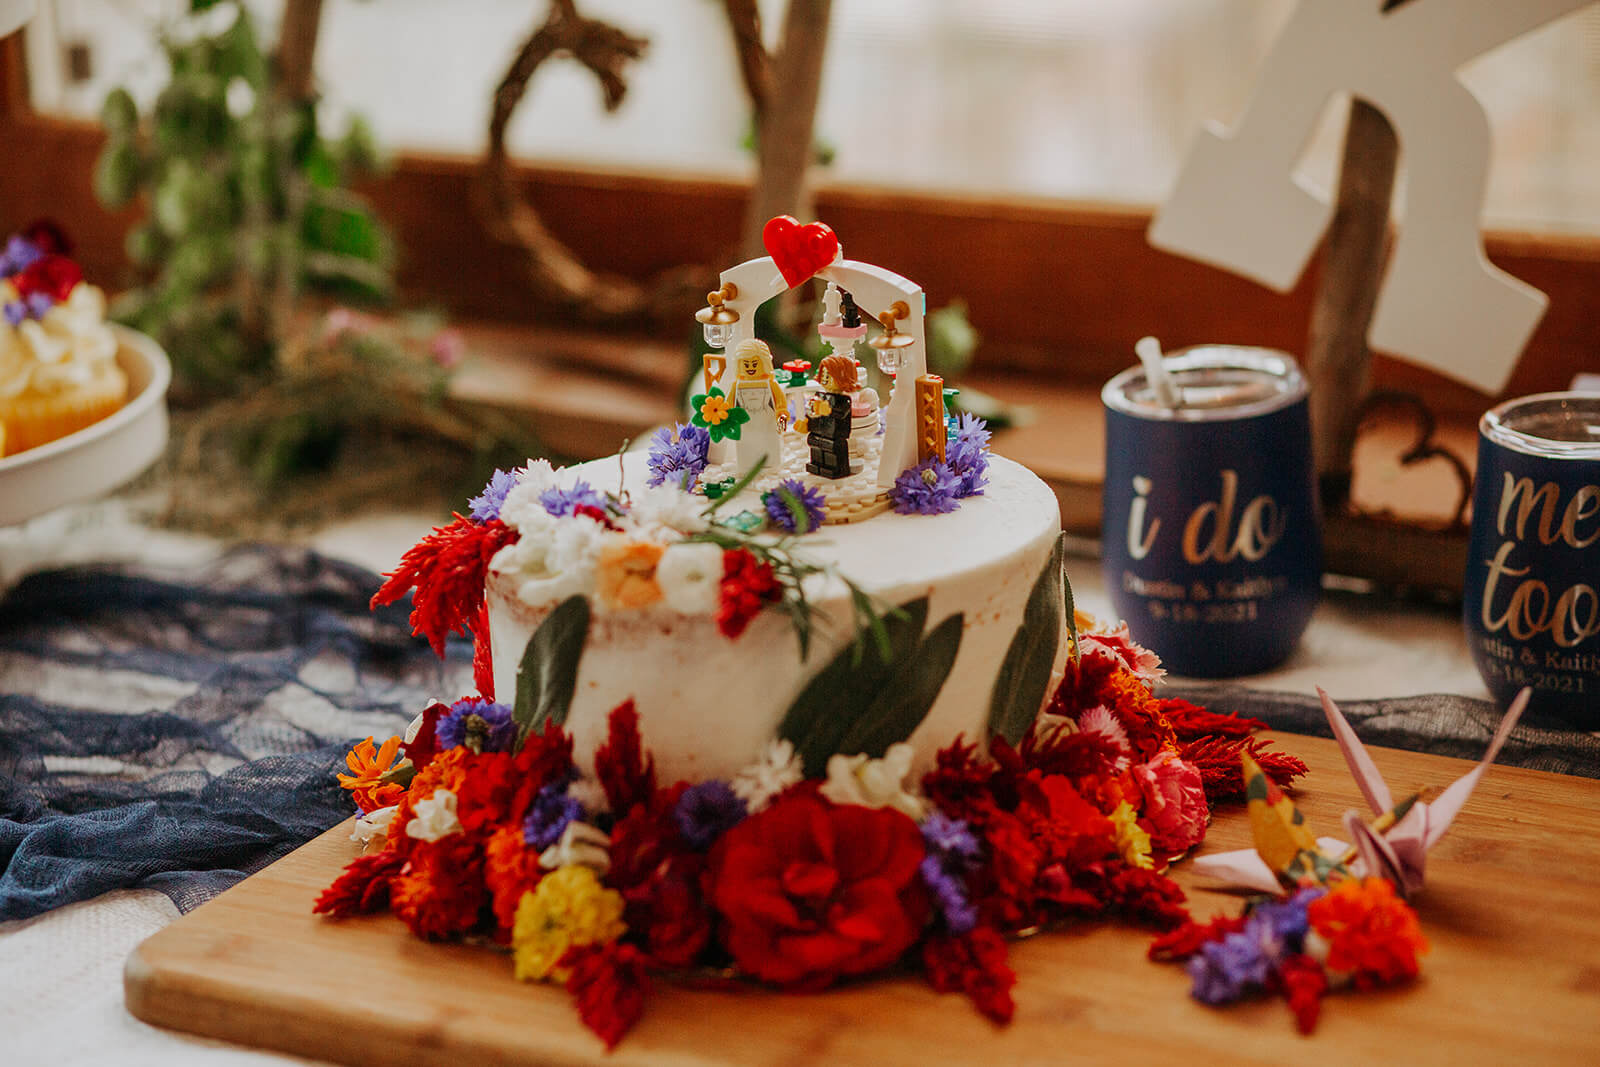 White wedding cake with red and purple flowers